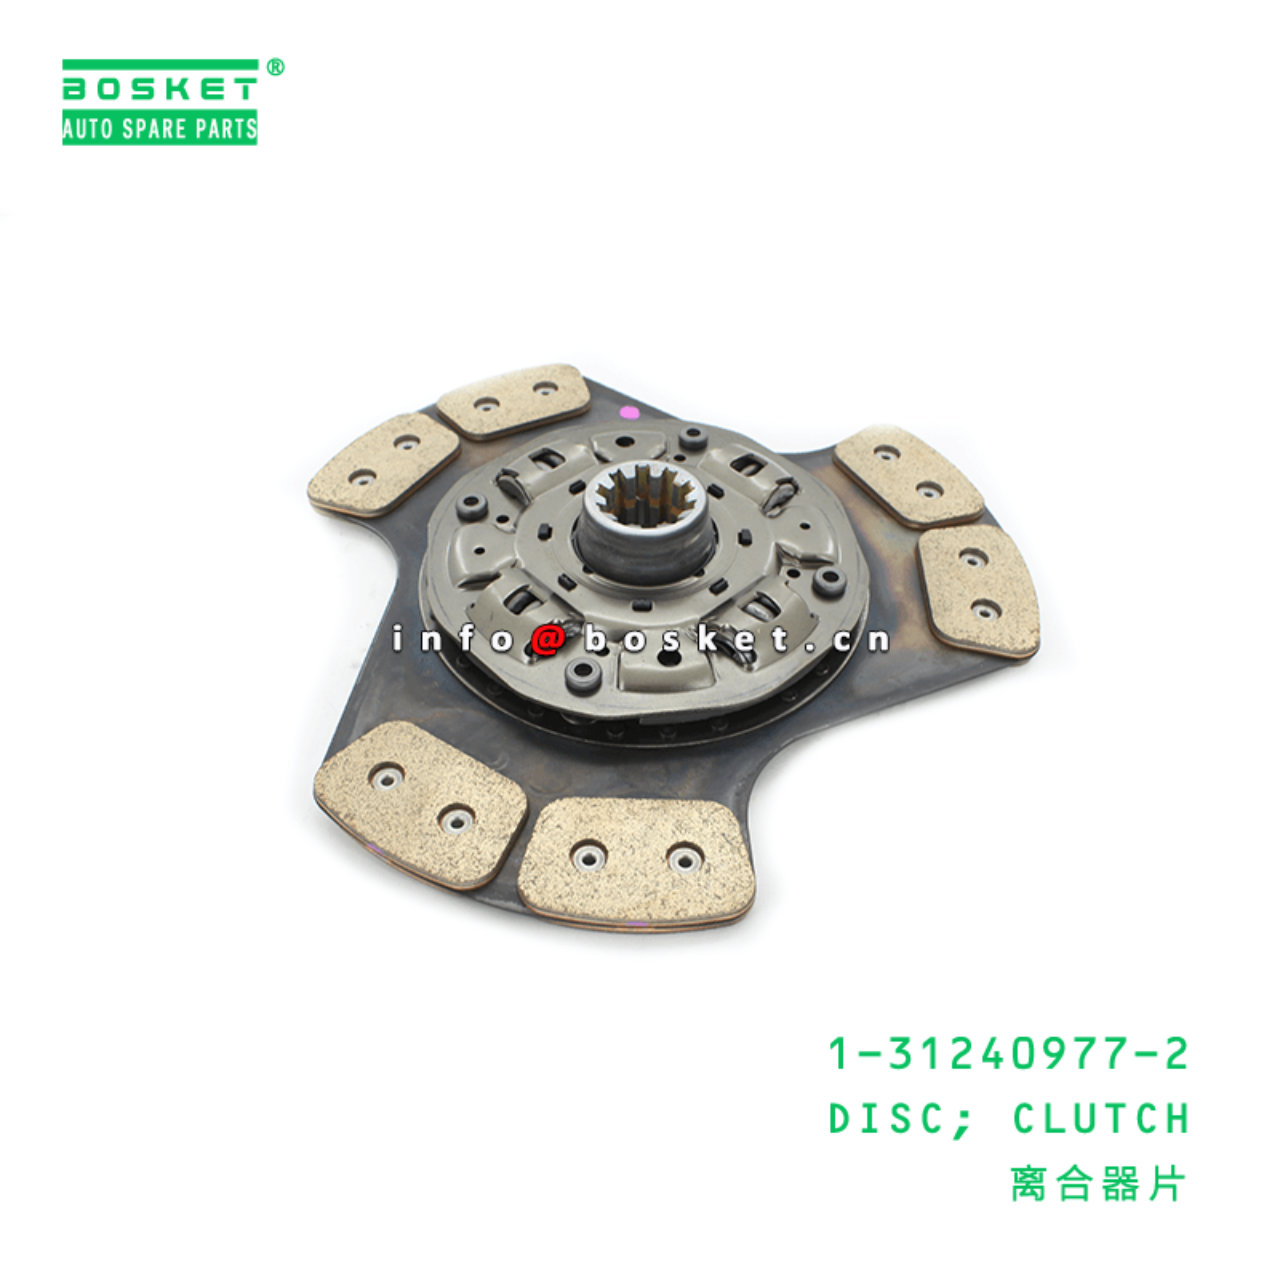 1-31240977-2 Clutch Disc Suitable for ISUZU FVR 1312409772 - For 